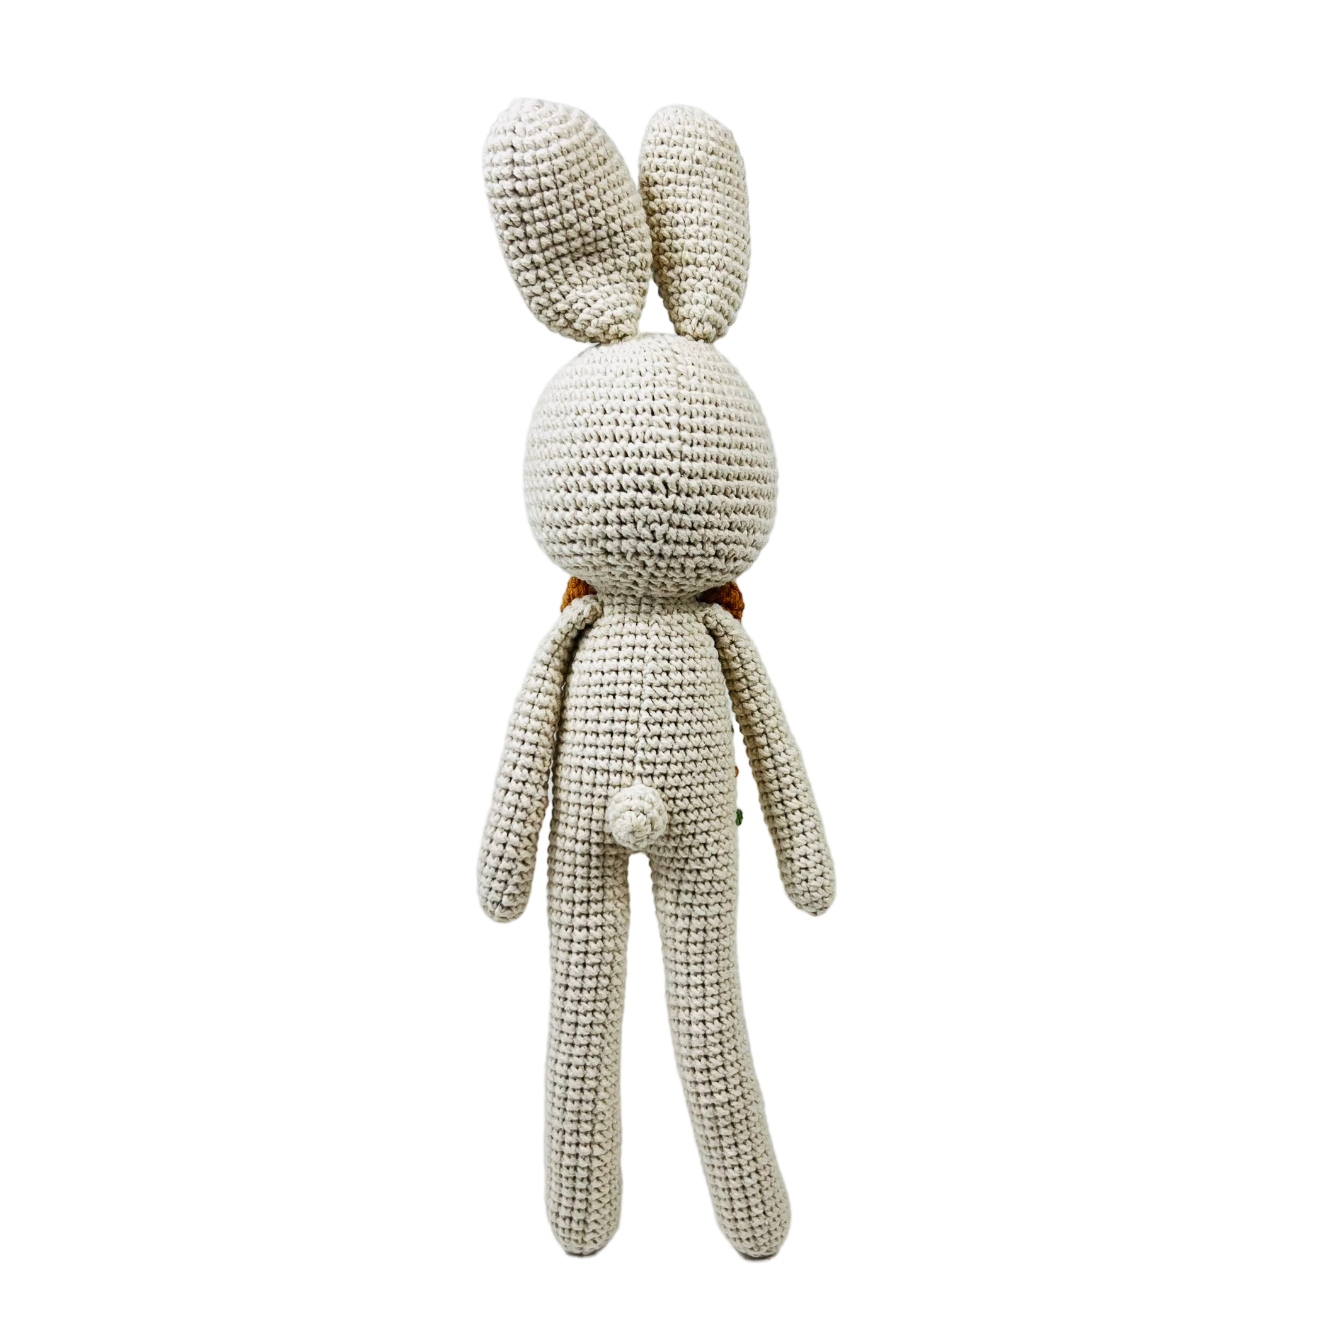 Crocheted Animal Doll - Oliver, the Bunny